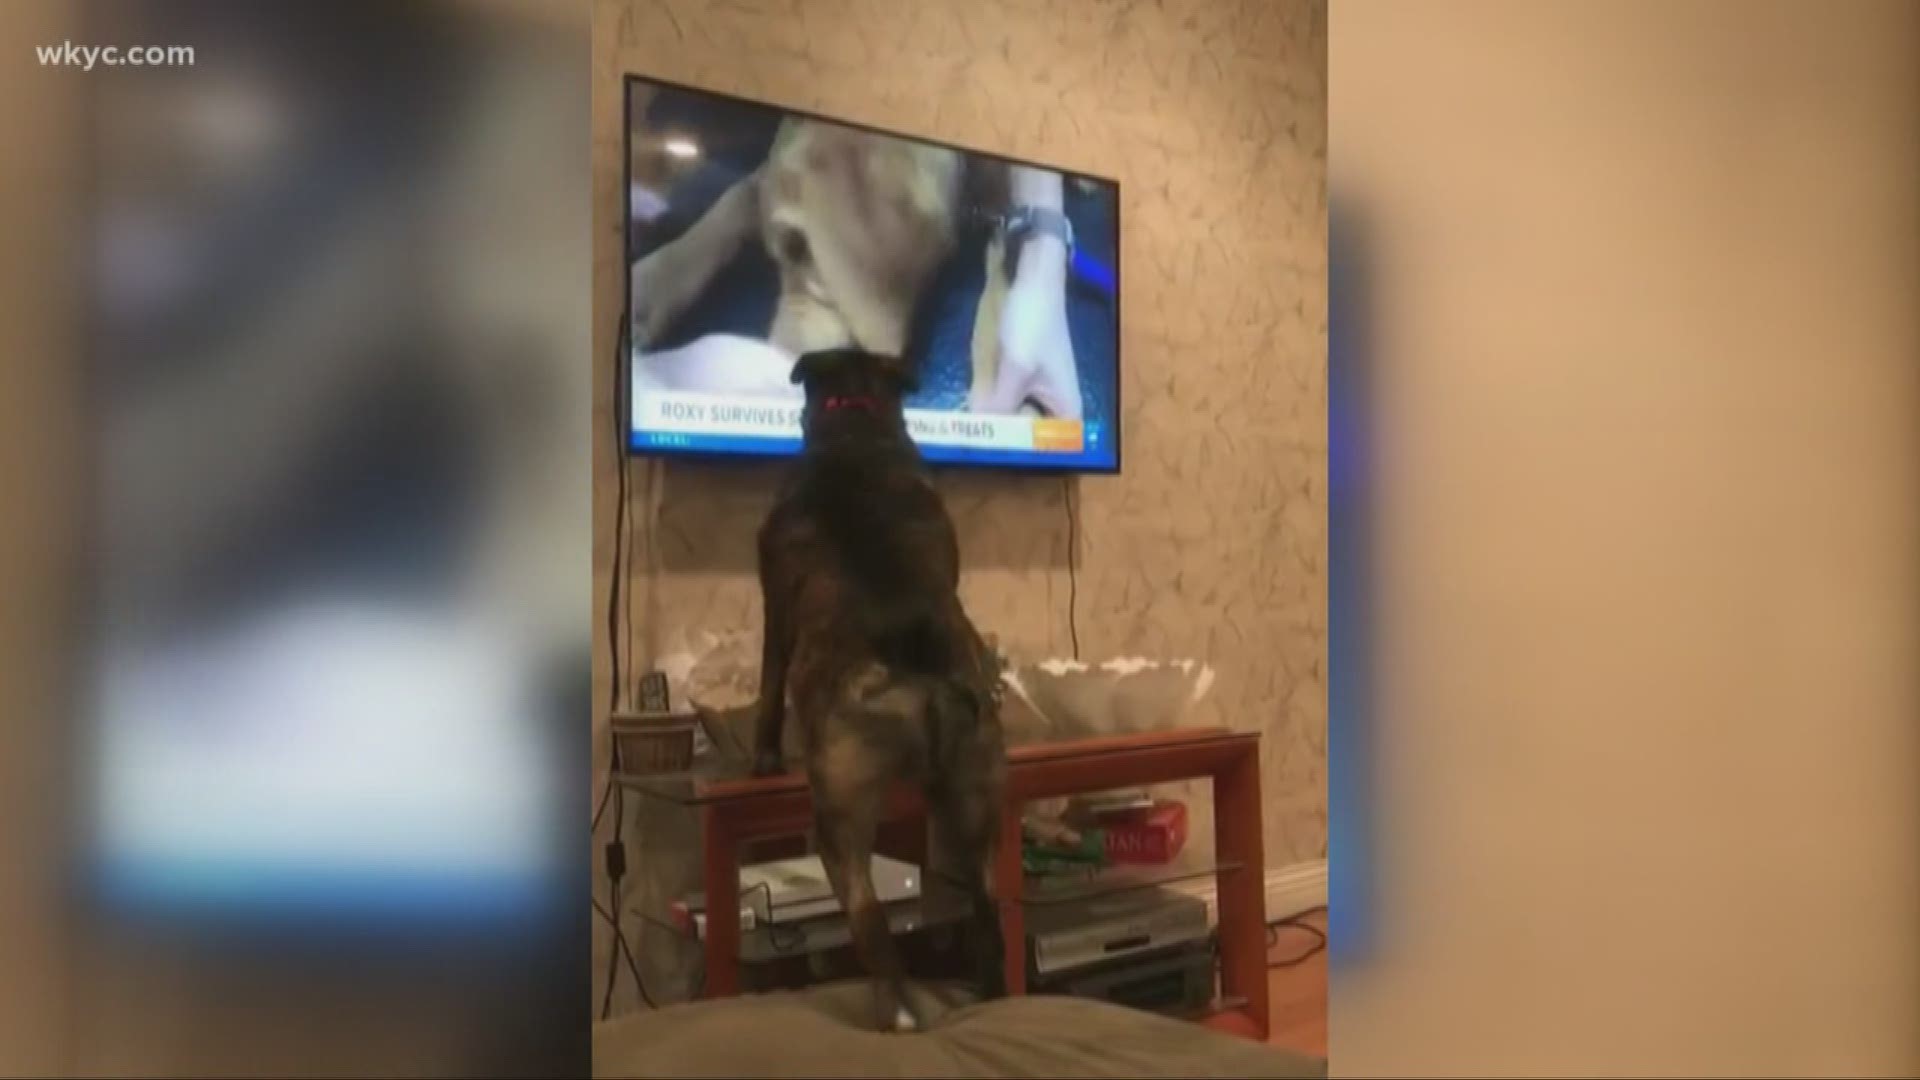 March 21, 2019: We love Roxy, our Wags 4 Warriors service dog in training, but she's clearly loved by our viewers, too. Shannon from Seville sent us this video of her dog Schuyler's excited response to seeing Roxy on TV.